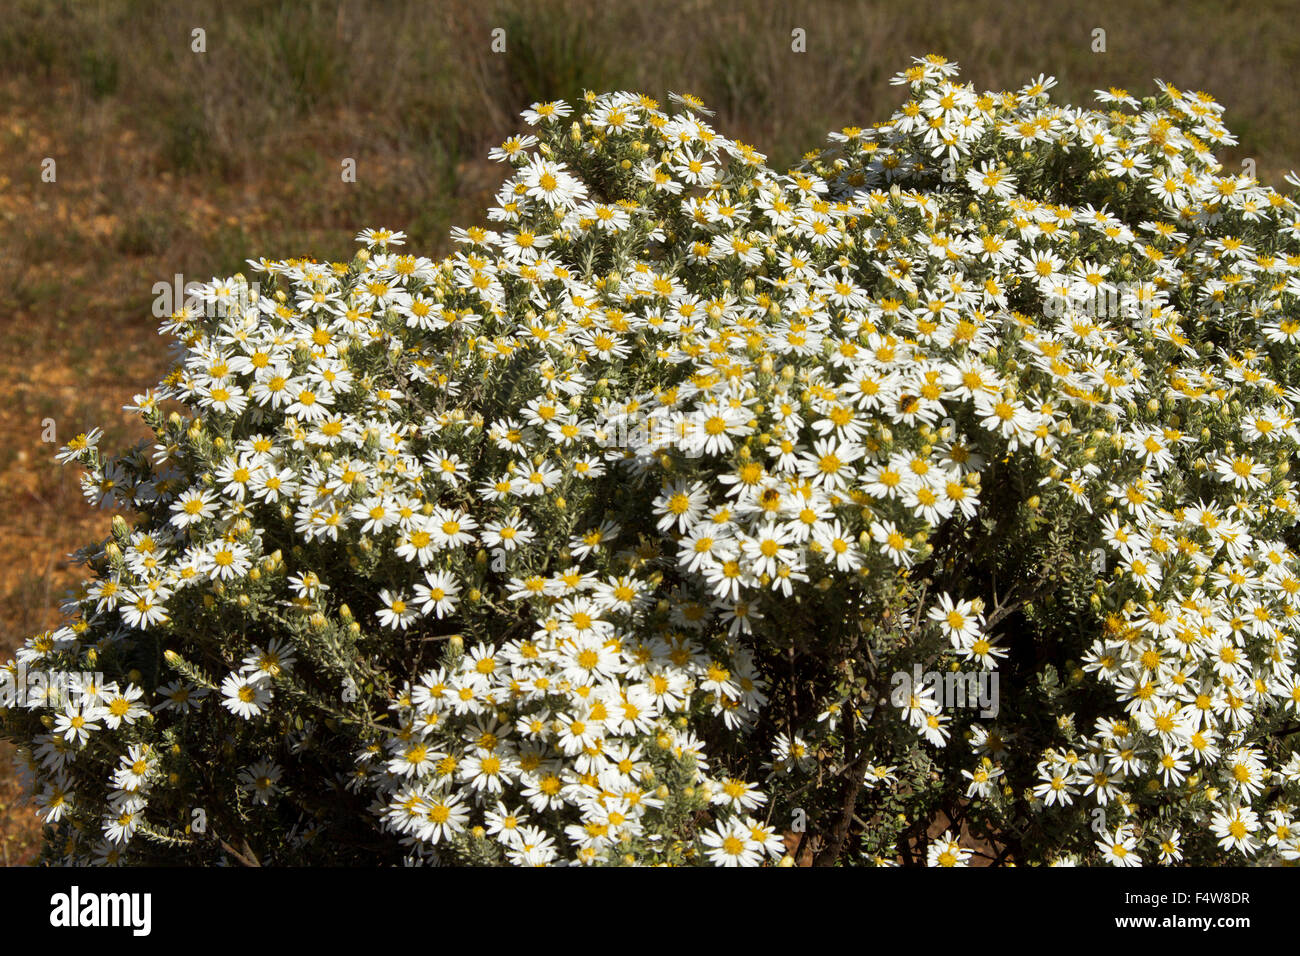 Mass of wildflowers, white daisies of Olearia pimeleoides, mallee daisy bush growing in outback South Australia Stock Photo